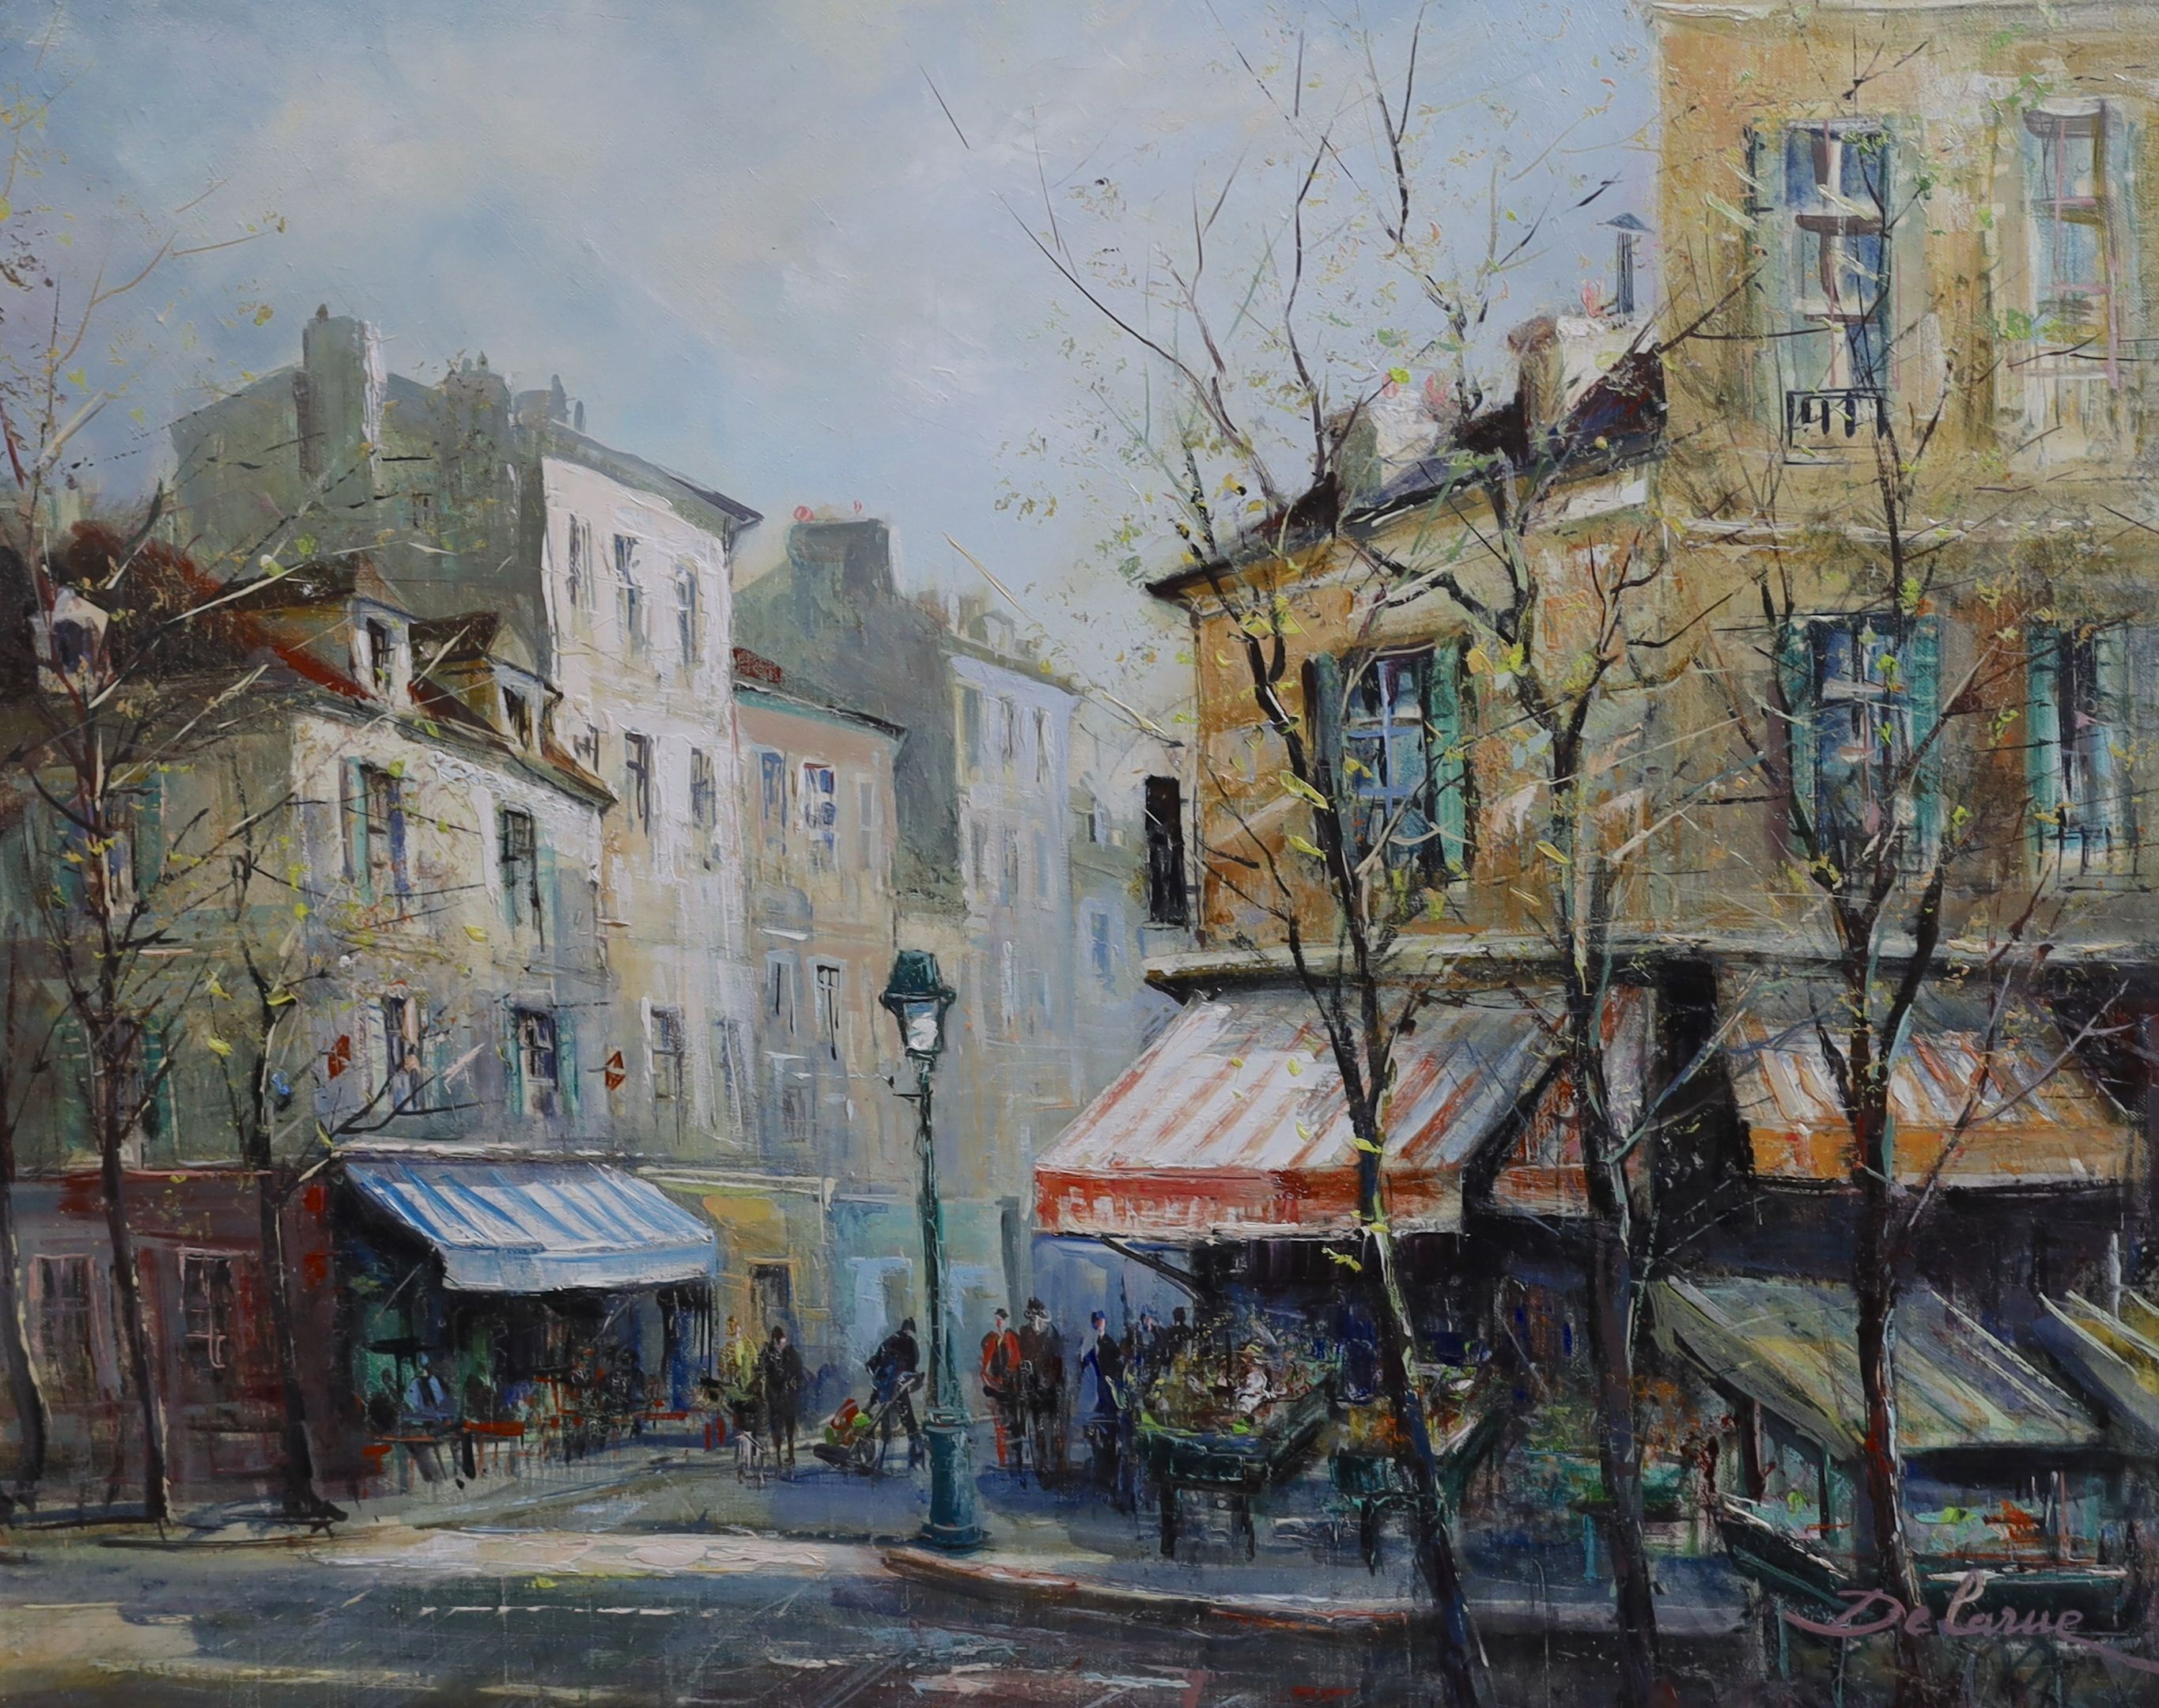 Lucien Delarue (French, 1925-2011), 'The cafe on the corner', oil on canvas, 58 x 71cm